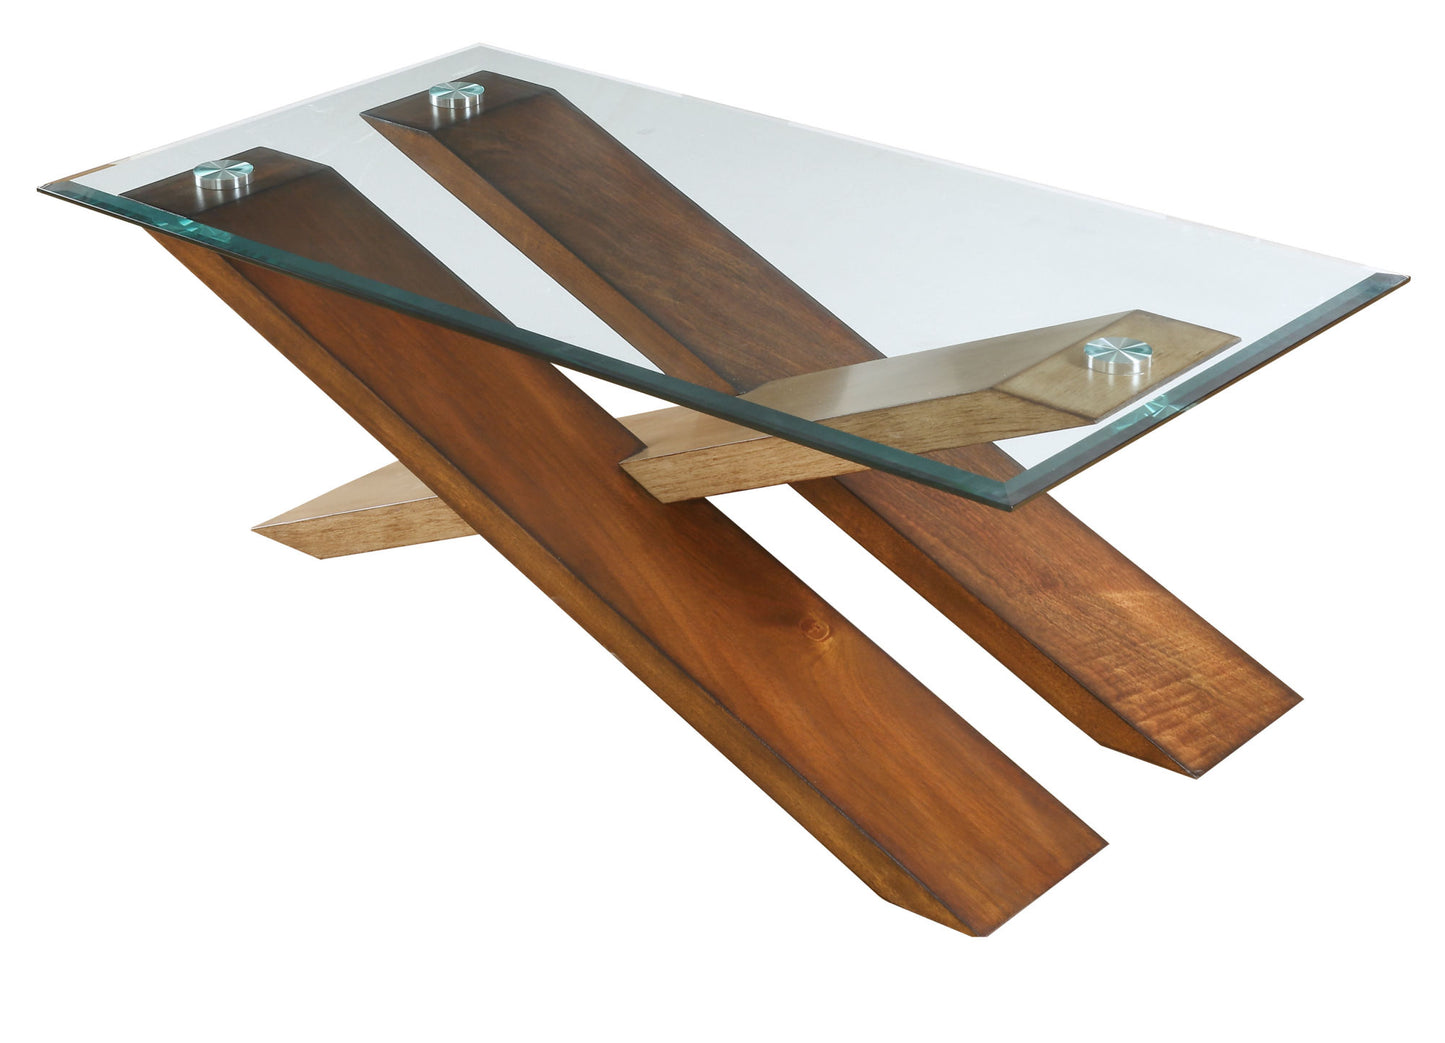 Modern Cross Tie End Table - Beveled Glass Top, Contrasting Natural and Cherry Finish - Unique Accent Piece, Stylish Home Brightener